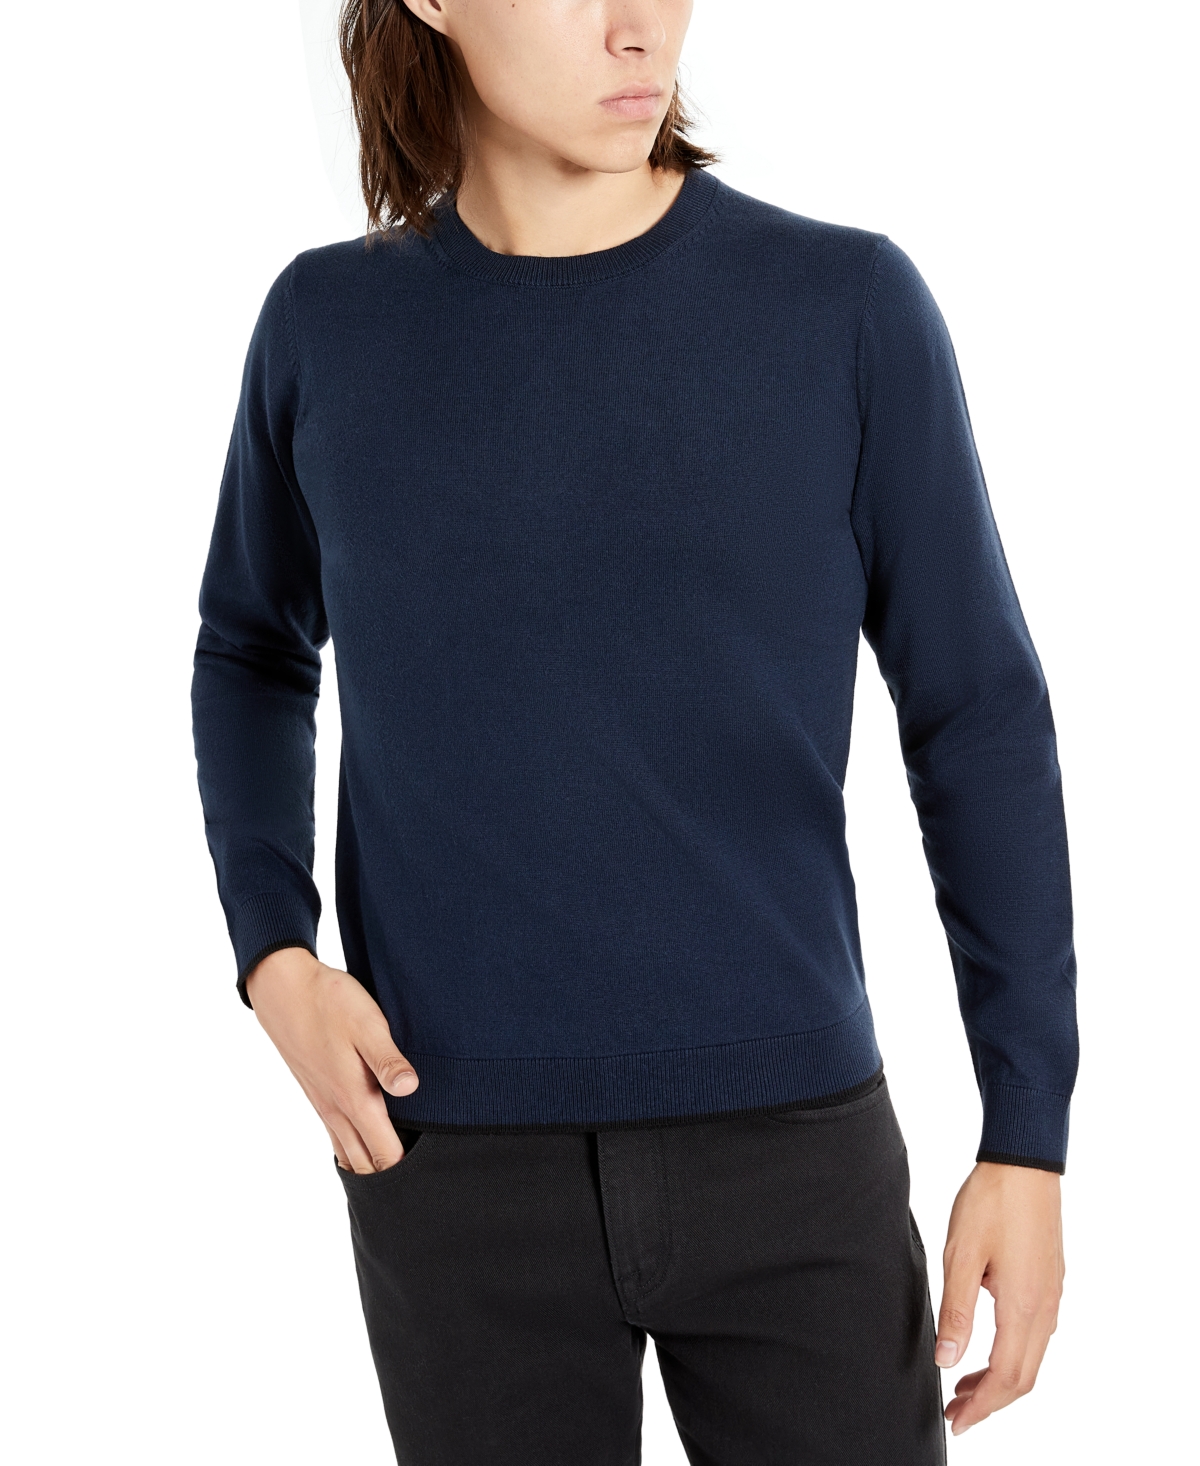 Kenneth Cole Men's Slim Fit Lightweight Crewneck Pullover Sweater In Navy